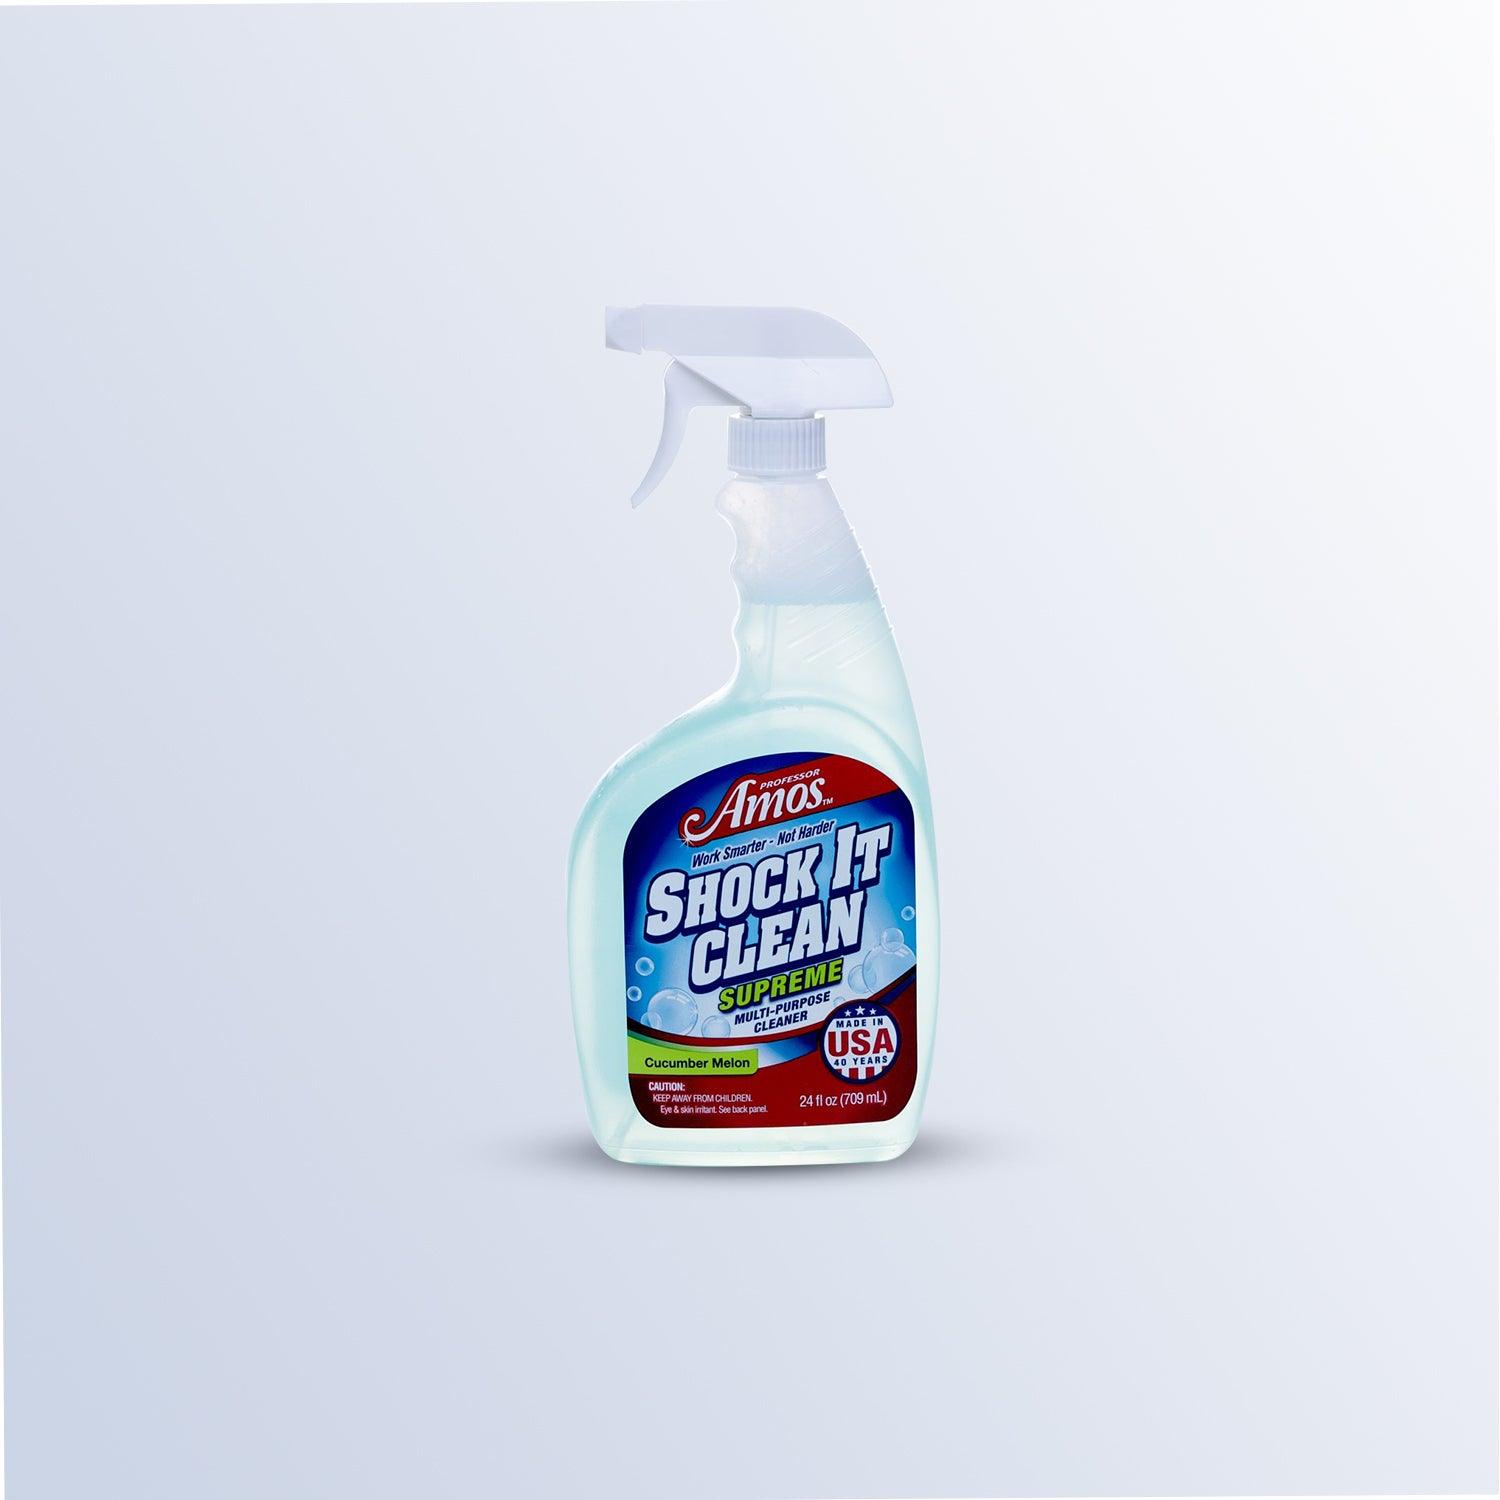 Shock It Clean Ready To Use - Professor Amos USA